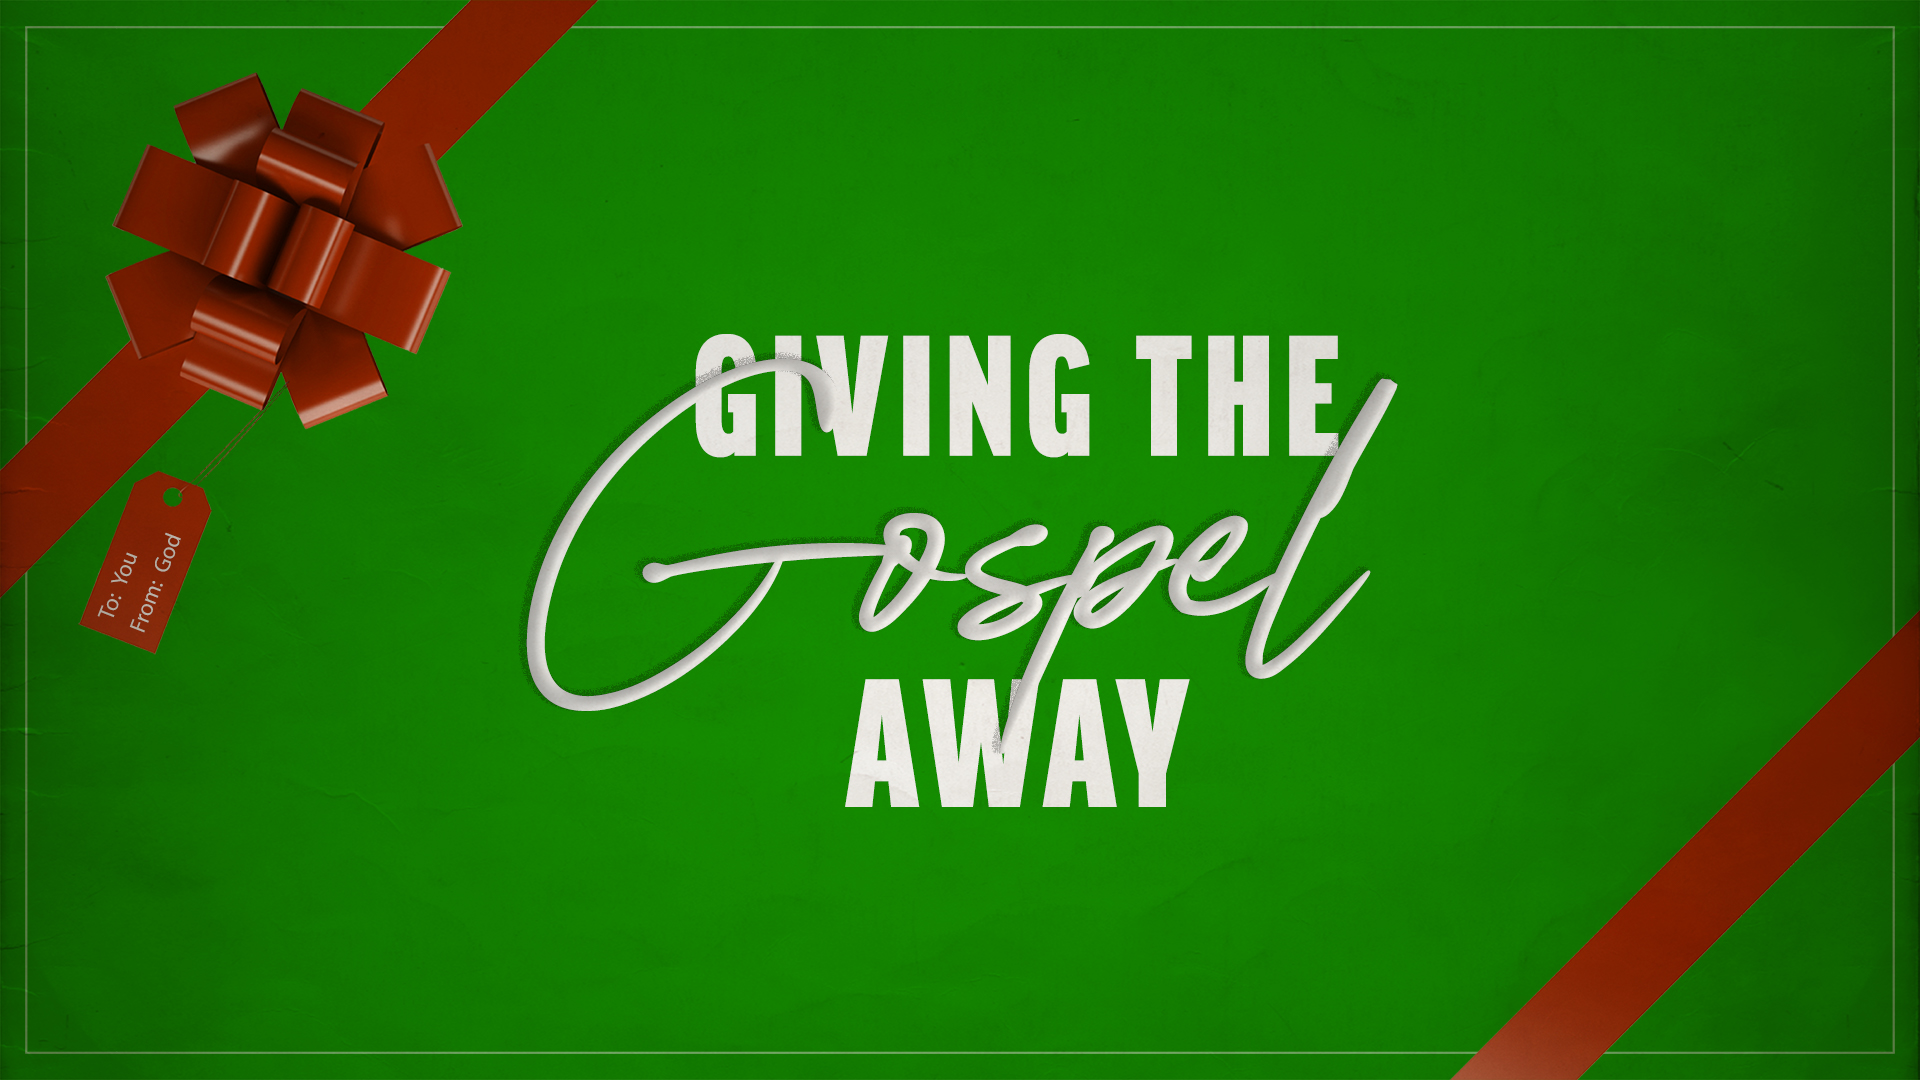 Give the Gospel Away Image